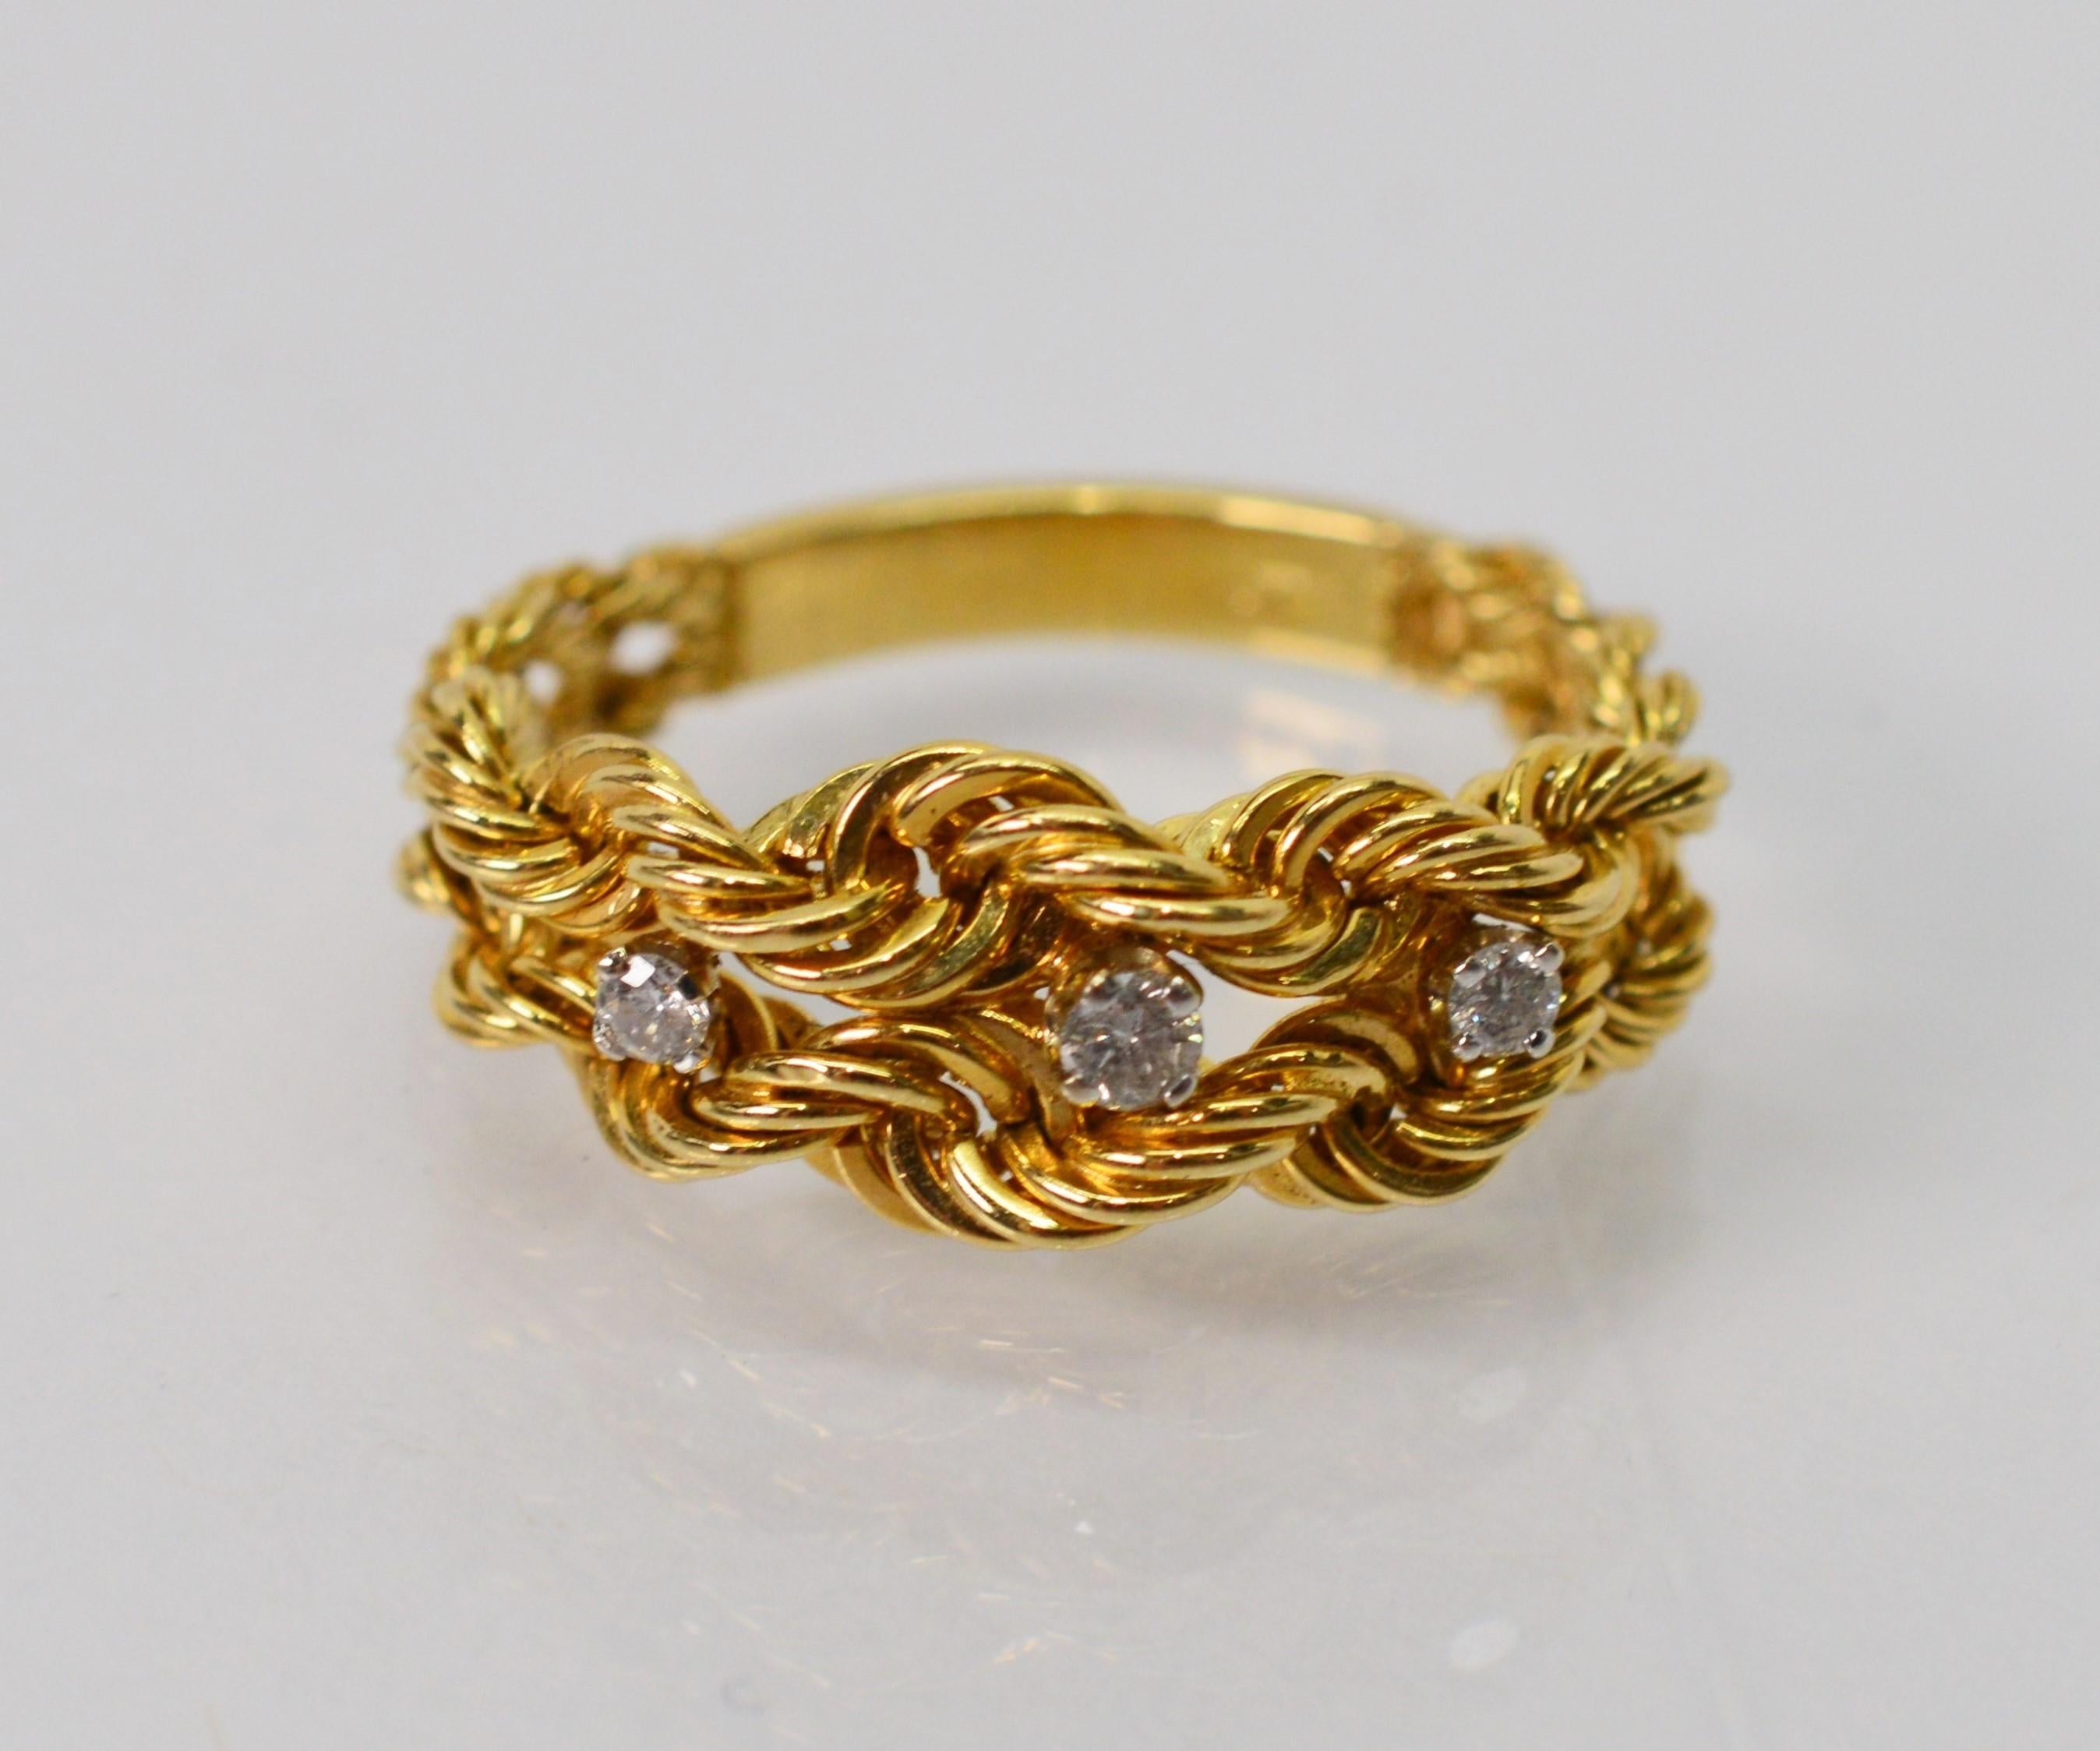 Women's 14 Karat Yellow Gold Braided Rope Chain Ring with Diamond Accents